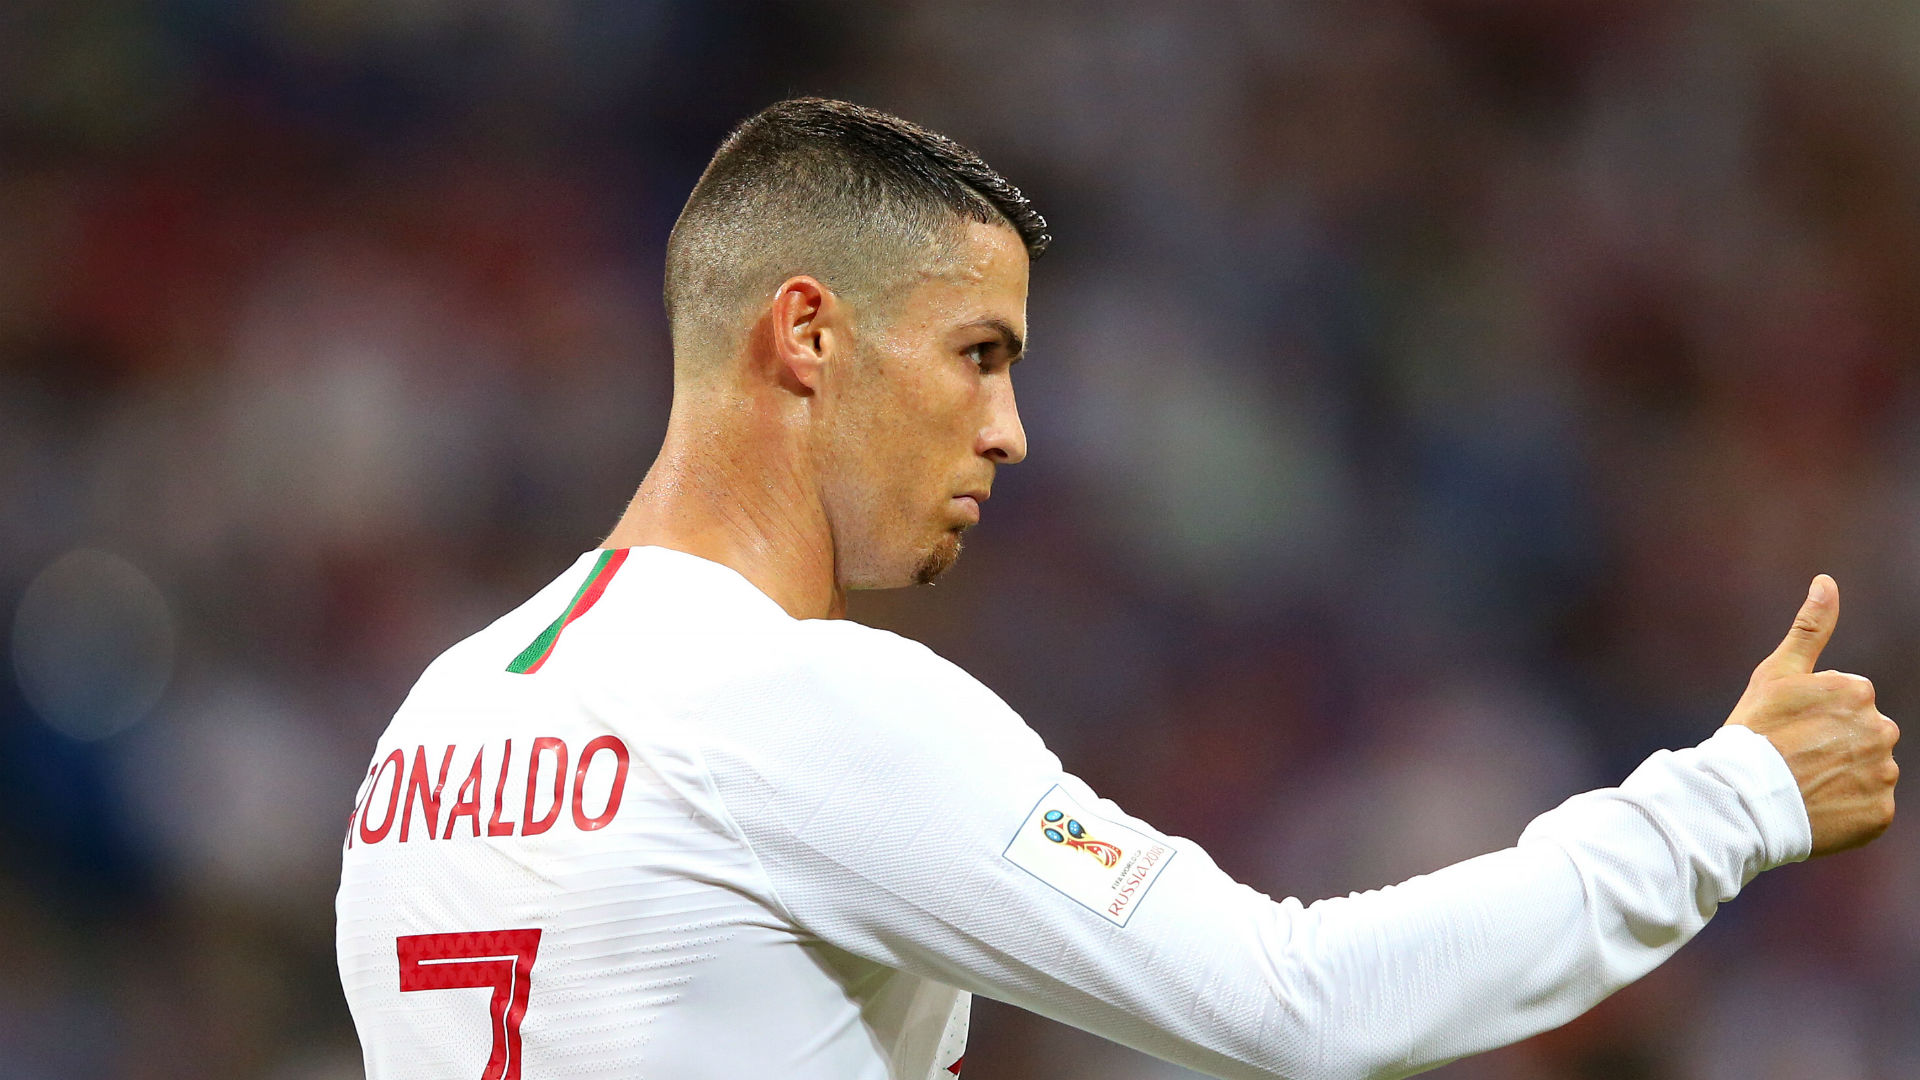 Cristiano Ronaldo went off injured in Portugal's Euro 2020 qualifier against Serbia but does not believe the issue is serious.